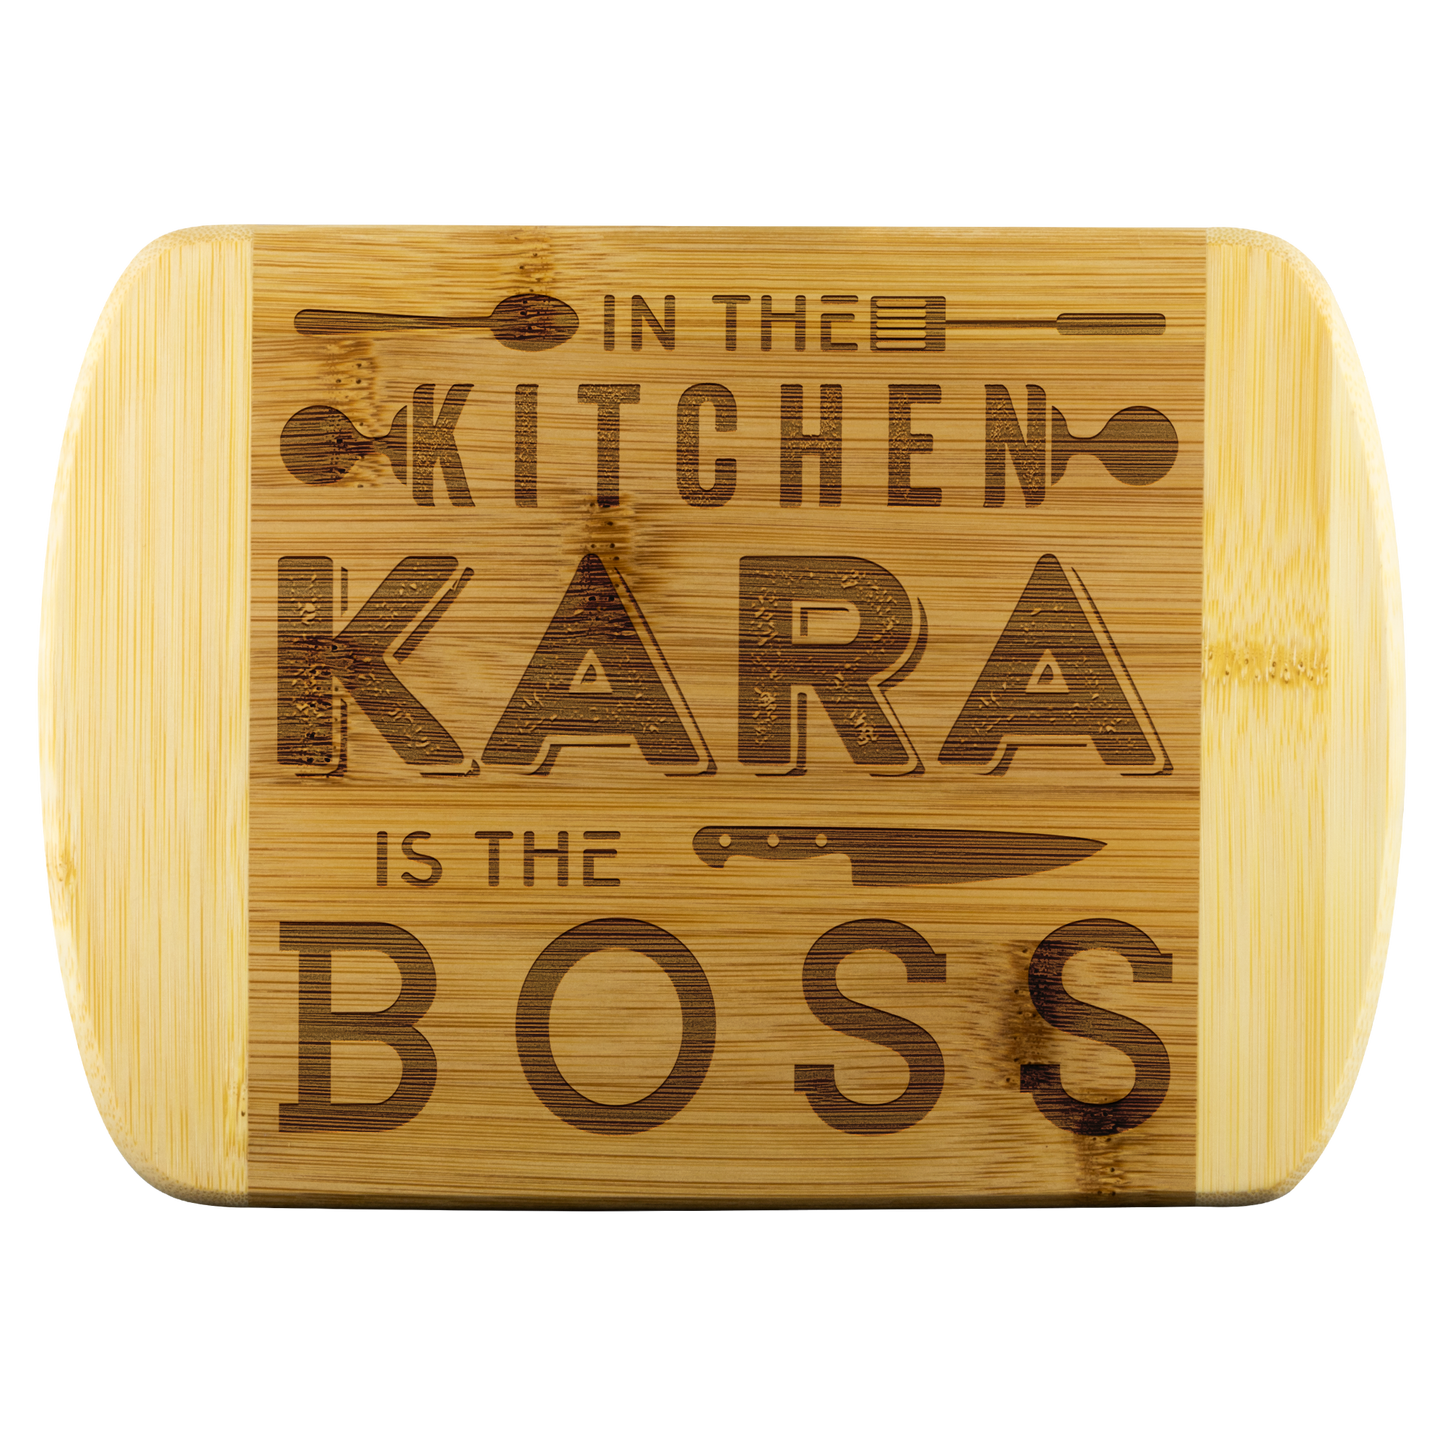 cub-20517135-sp-45031 - [ Kara | 1 | 1 ] (TL_RoundEdgeWoodCuttingBoard) Gift Ideas For Mom - In The Kitchen Kara Is The Boss - Funny